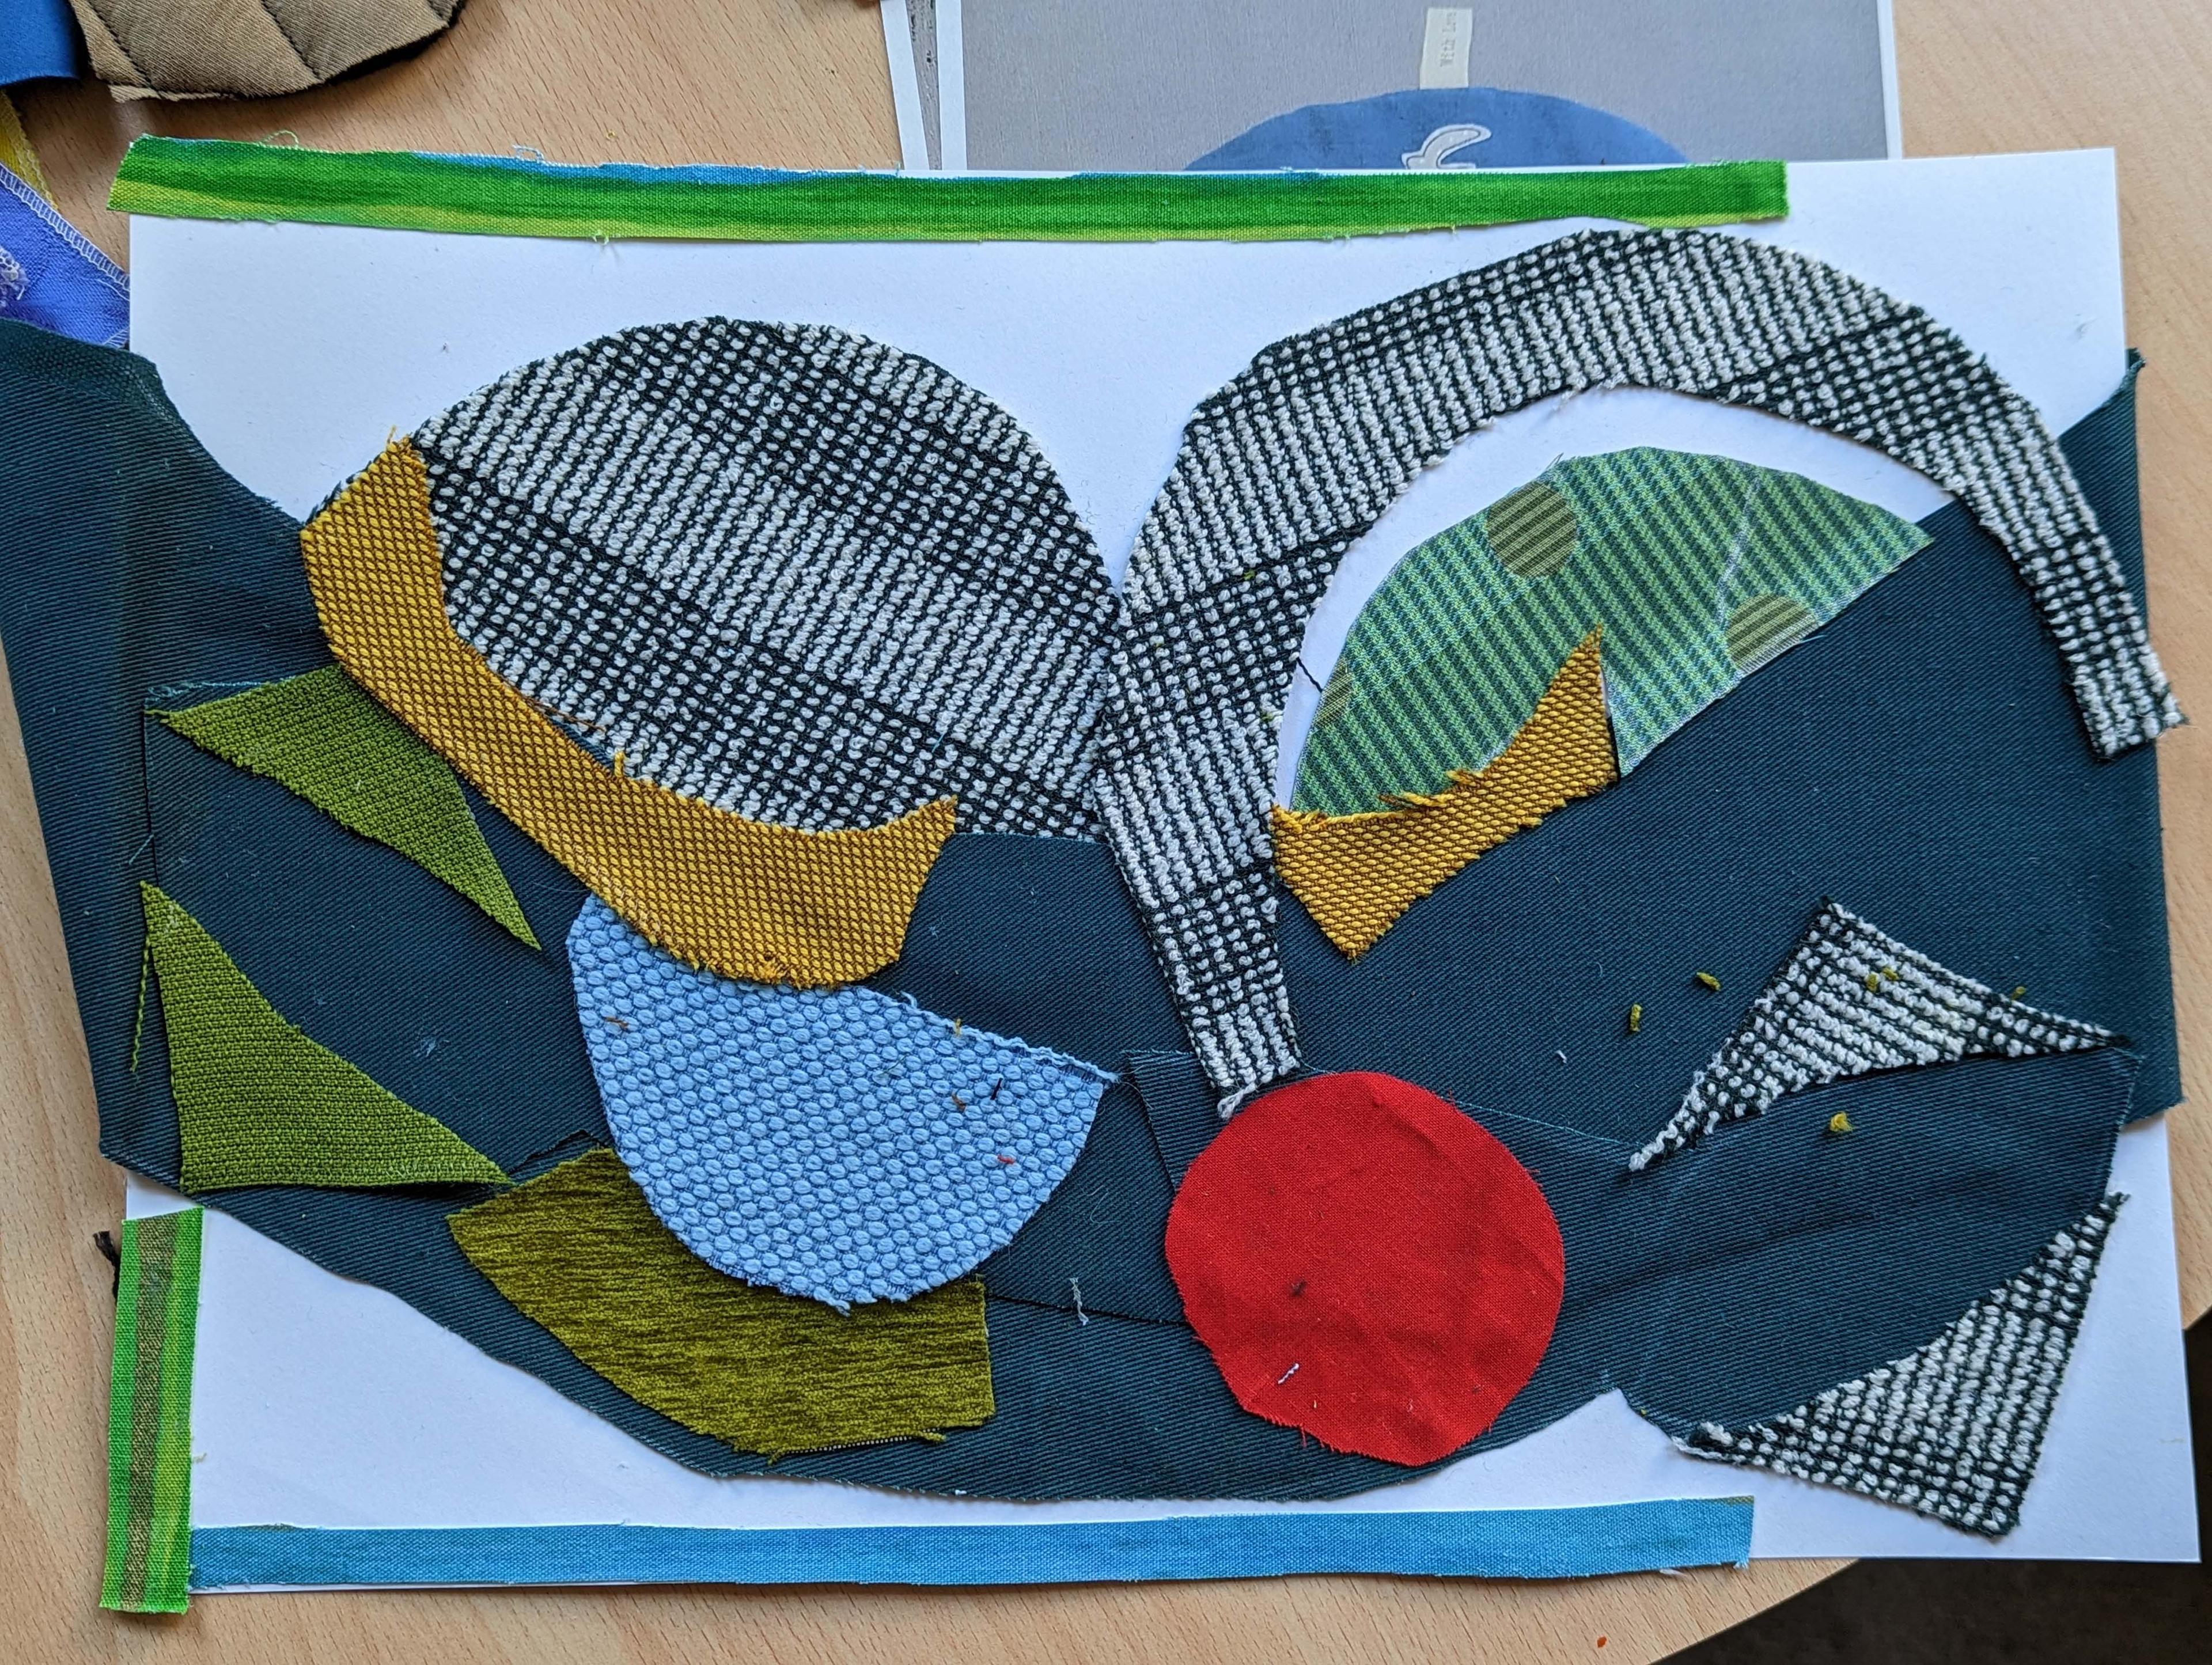 Fabric collage on paper.